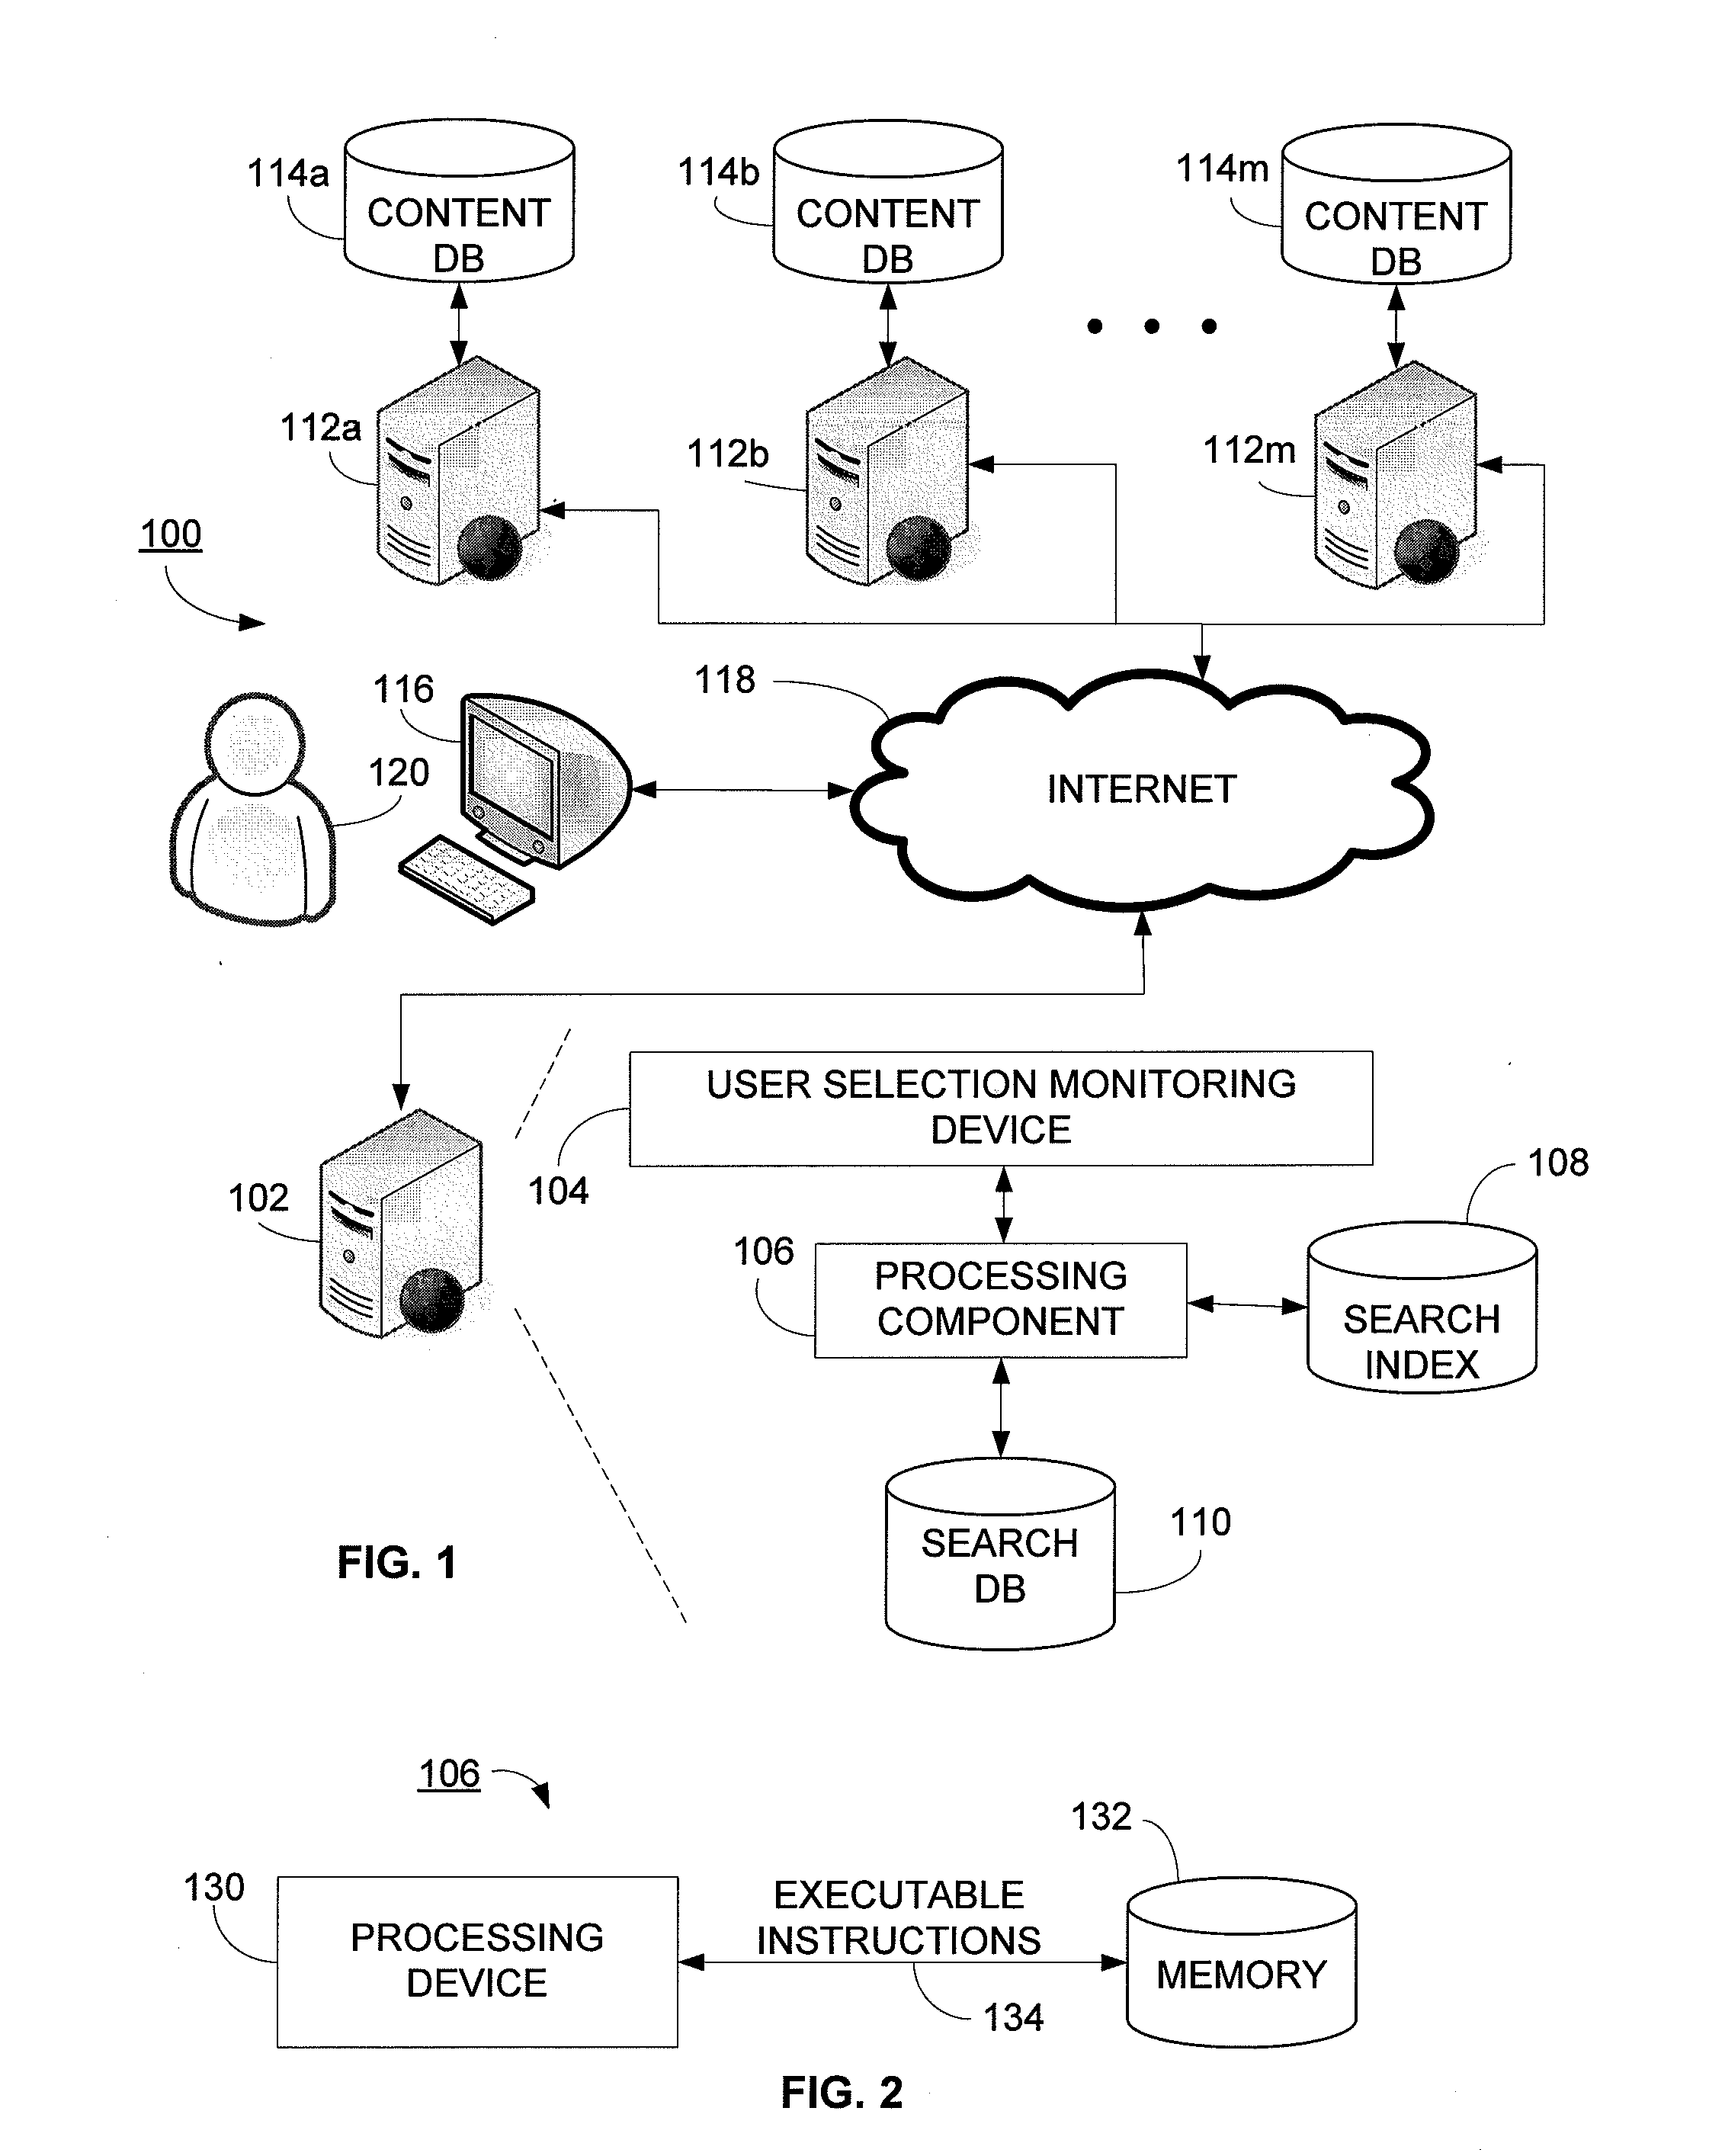 System and method for modeling user selection feedback in a search result page